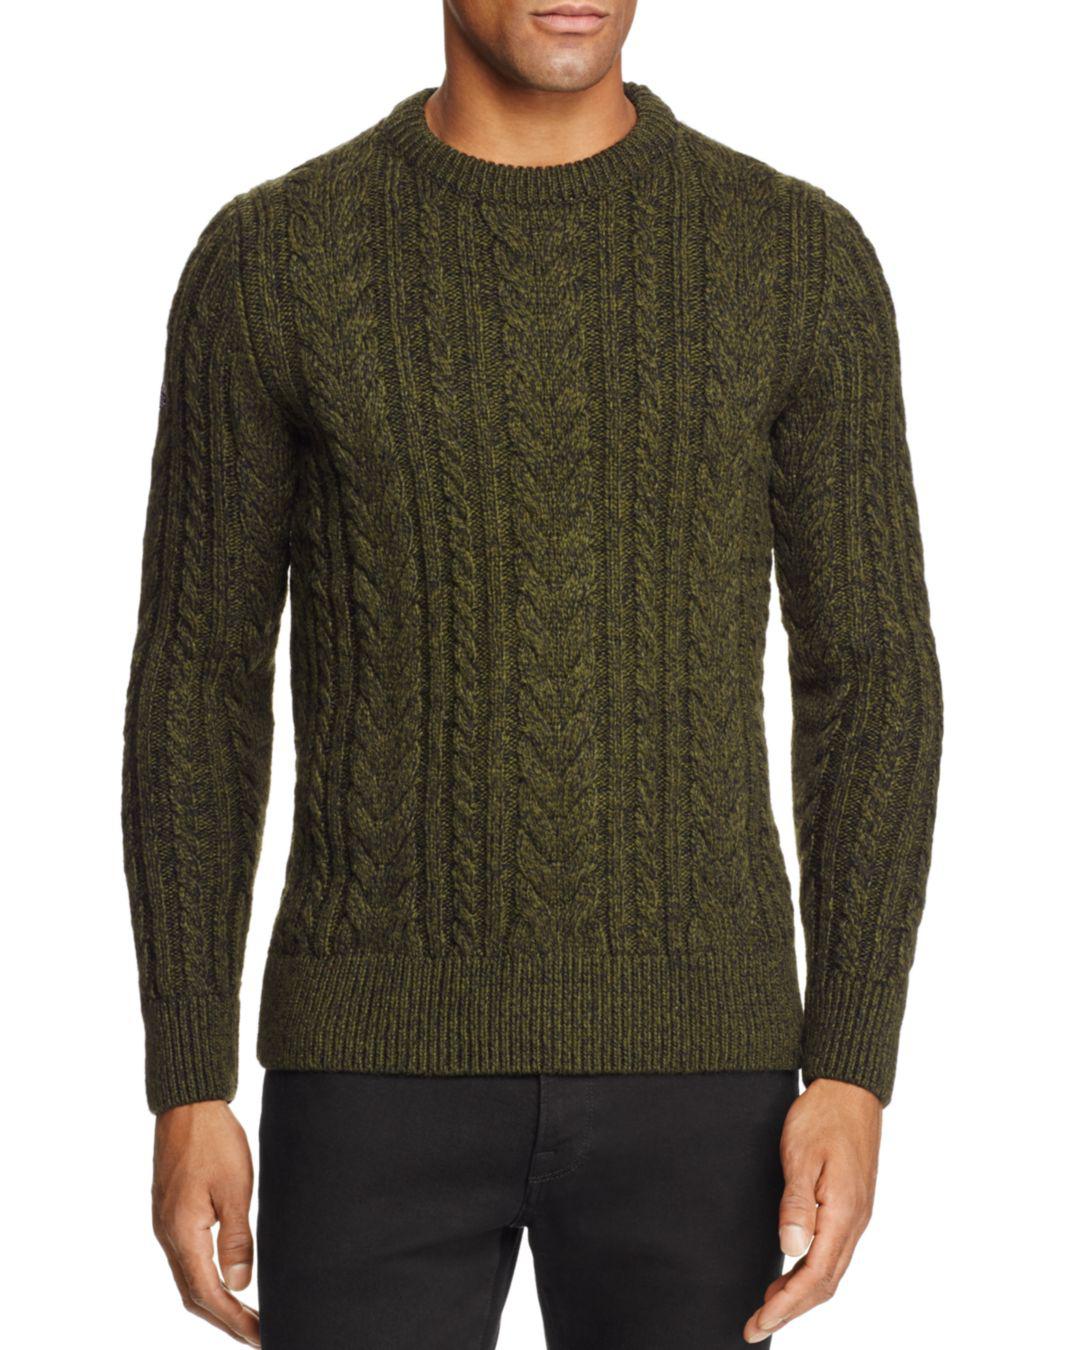 Superdry Jacob Heritage Cable Knit Crewneck Sweater in Green for Men - Lyst